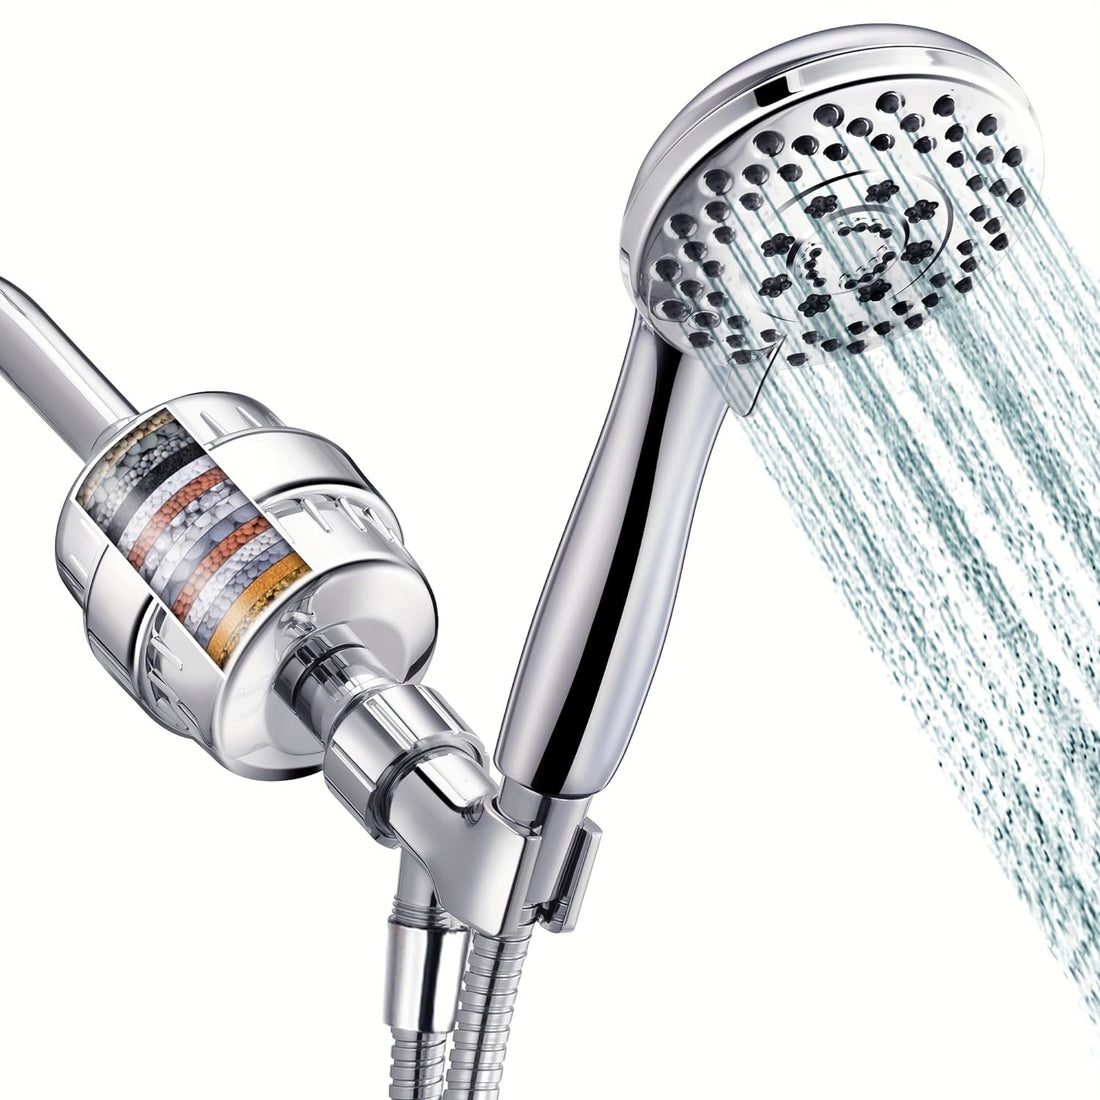 18 STAGE FILTERED SHOWER HEAD